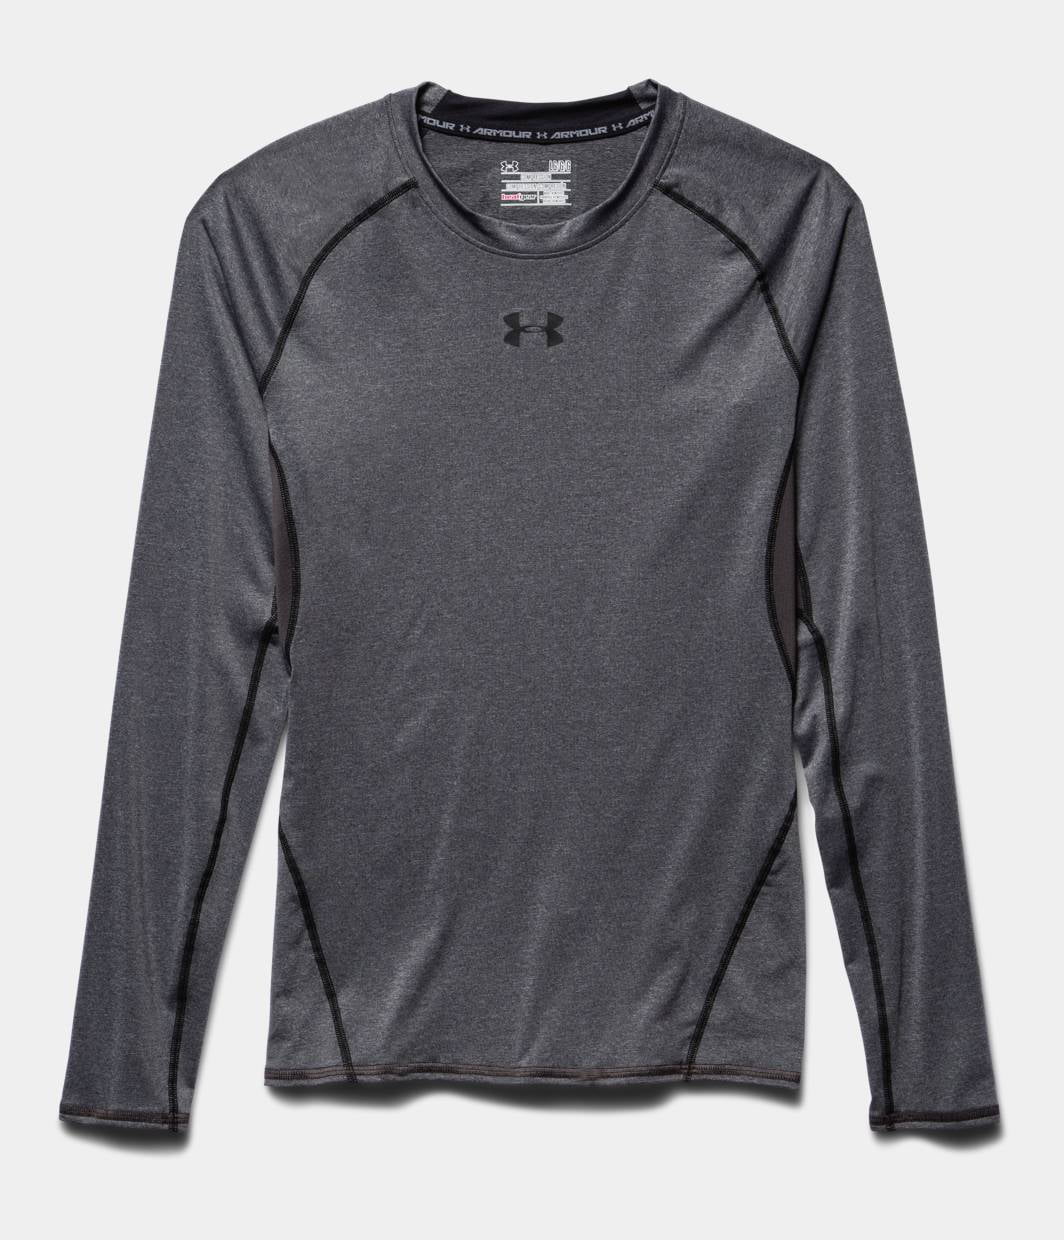 Under Armour Men's Hg Long Sleeve Compression Shirt, Grey